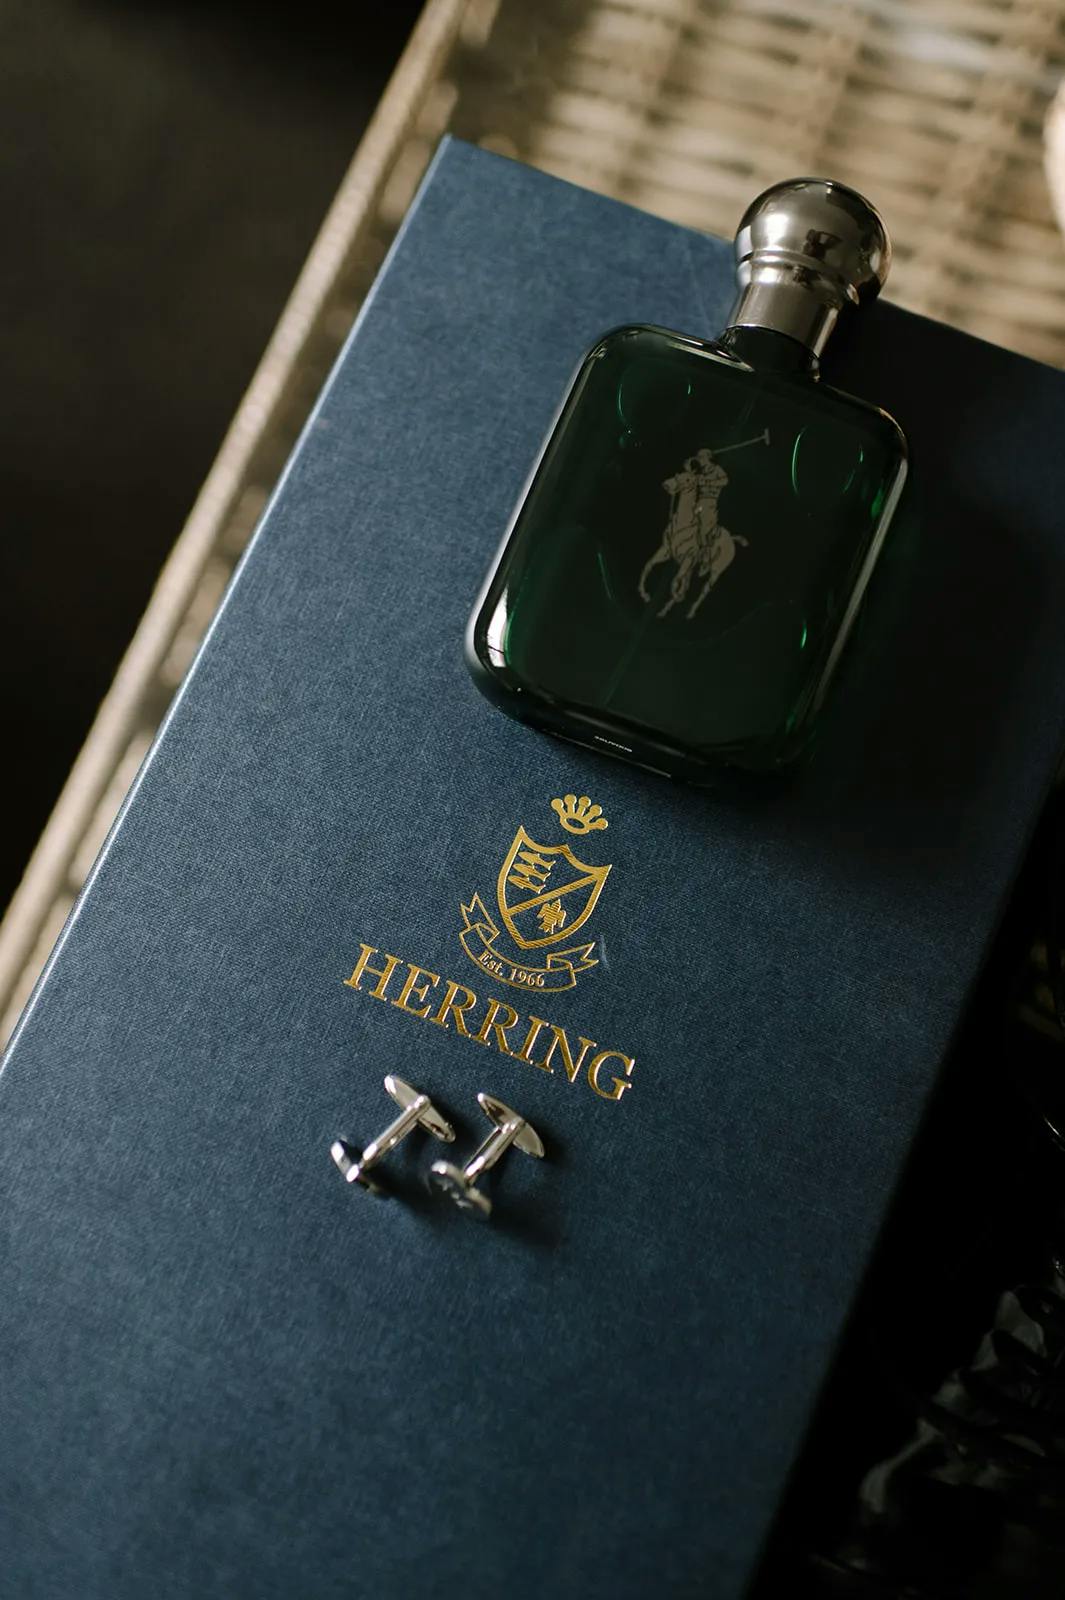 A dark green glass bottle of cologne with a silver cap rests on a dark blue box labeled "Herring" with a gold crest. Beside the cologne, a pair of silver cufflinks shaped like the letter "H" are placed on the box.